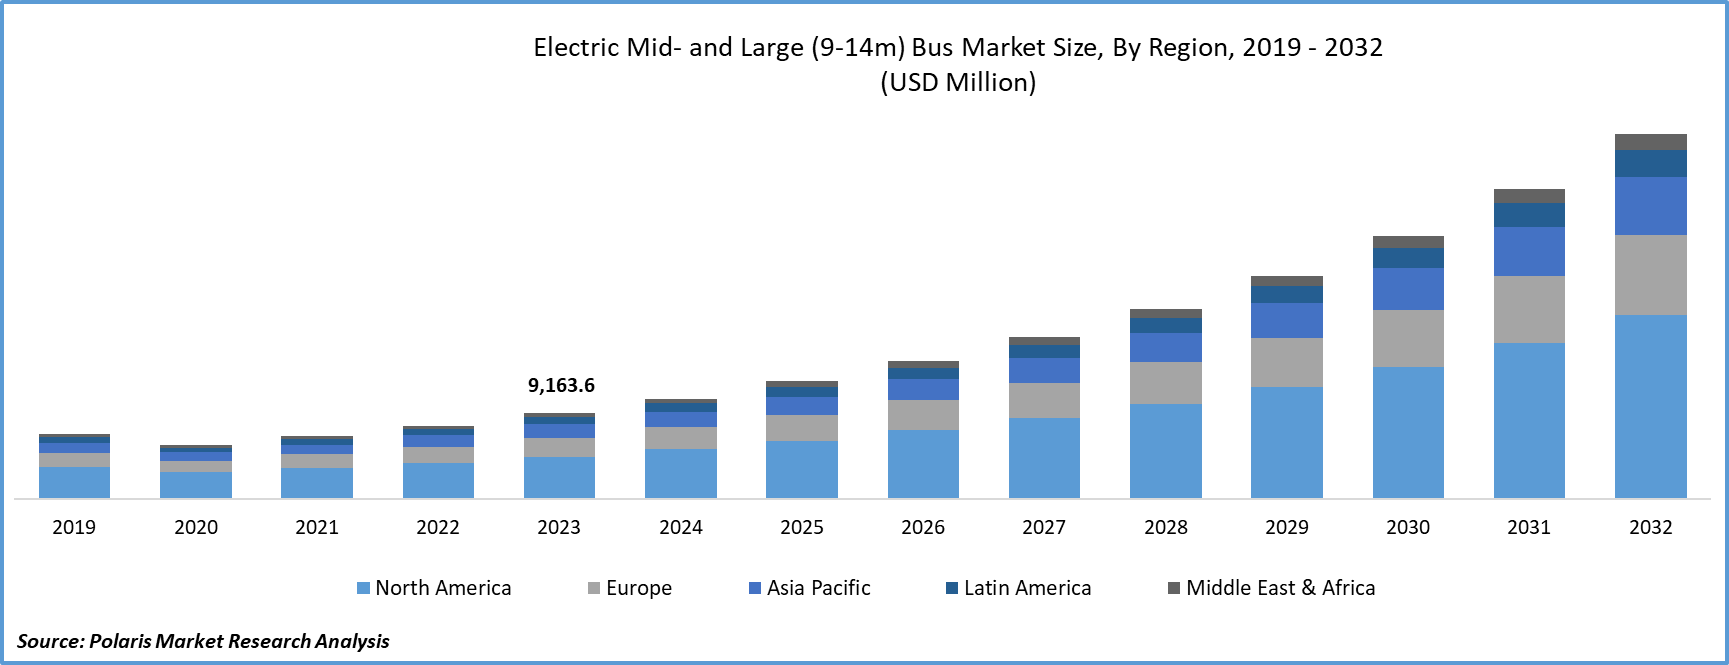 Electric Mid- and Large (9-14m) Bus Market Size